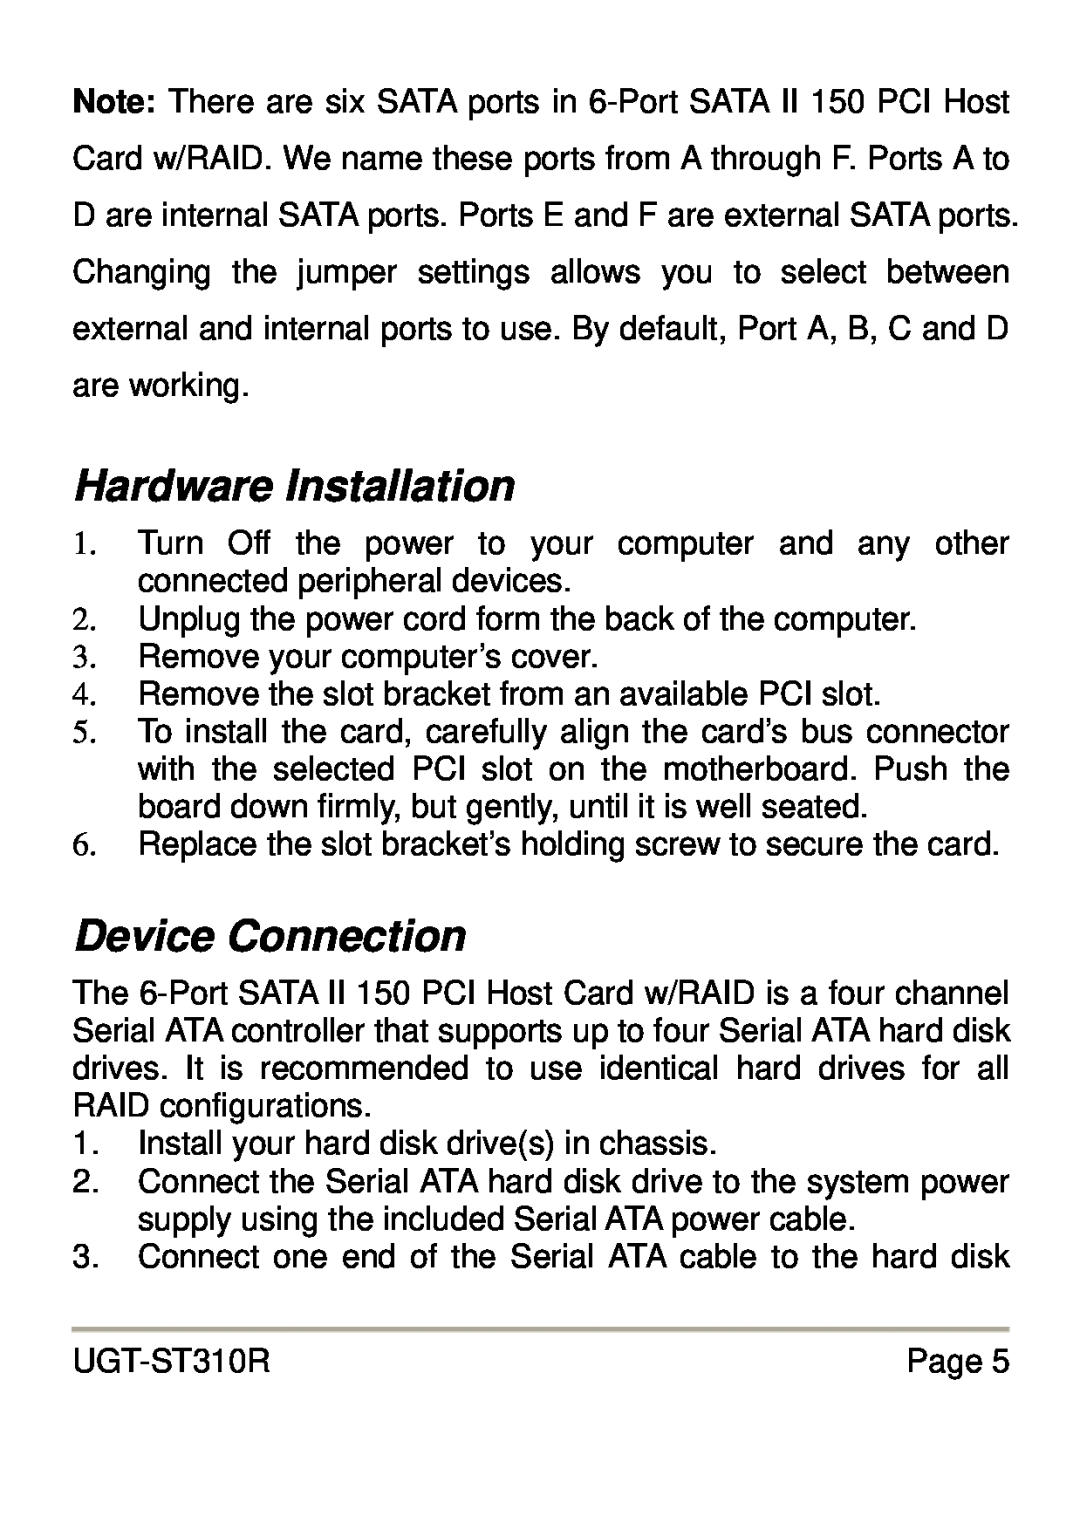 Vantec UGT-ST310R user manual Hardware Installation, Device Connection 